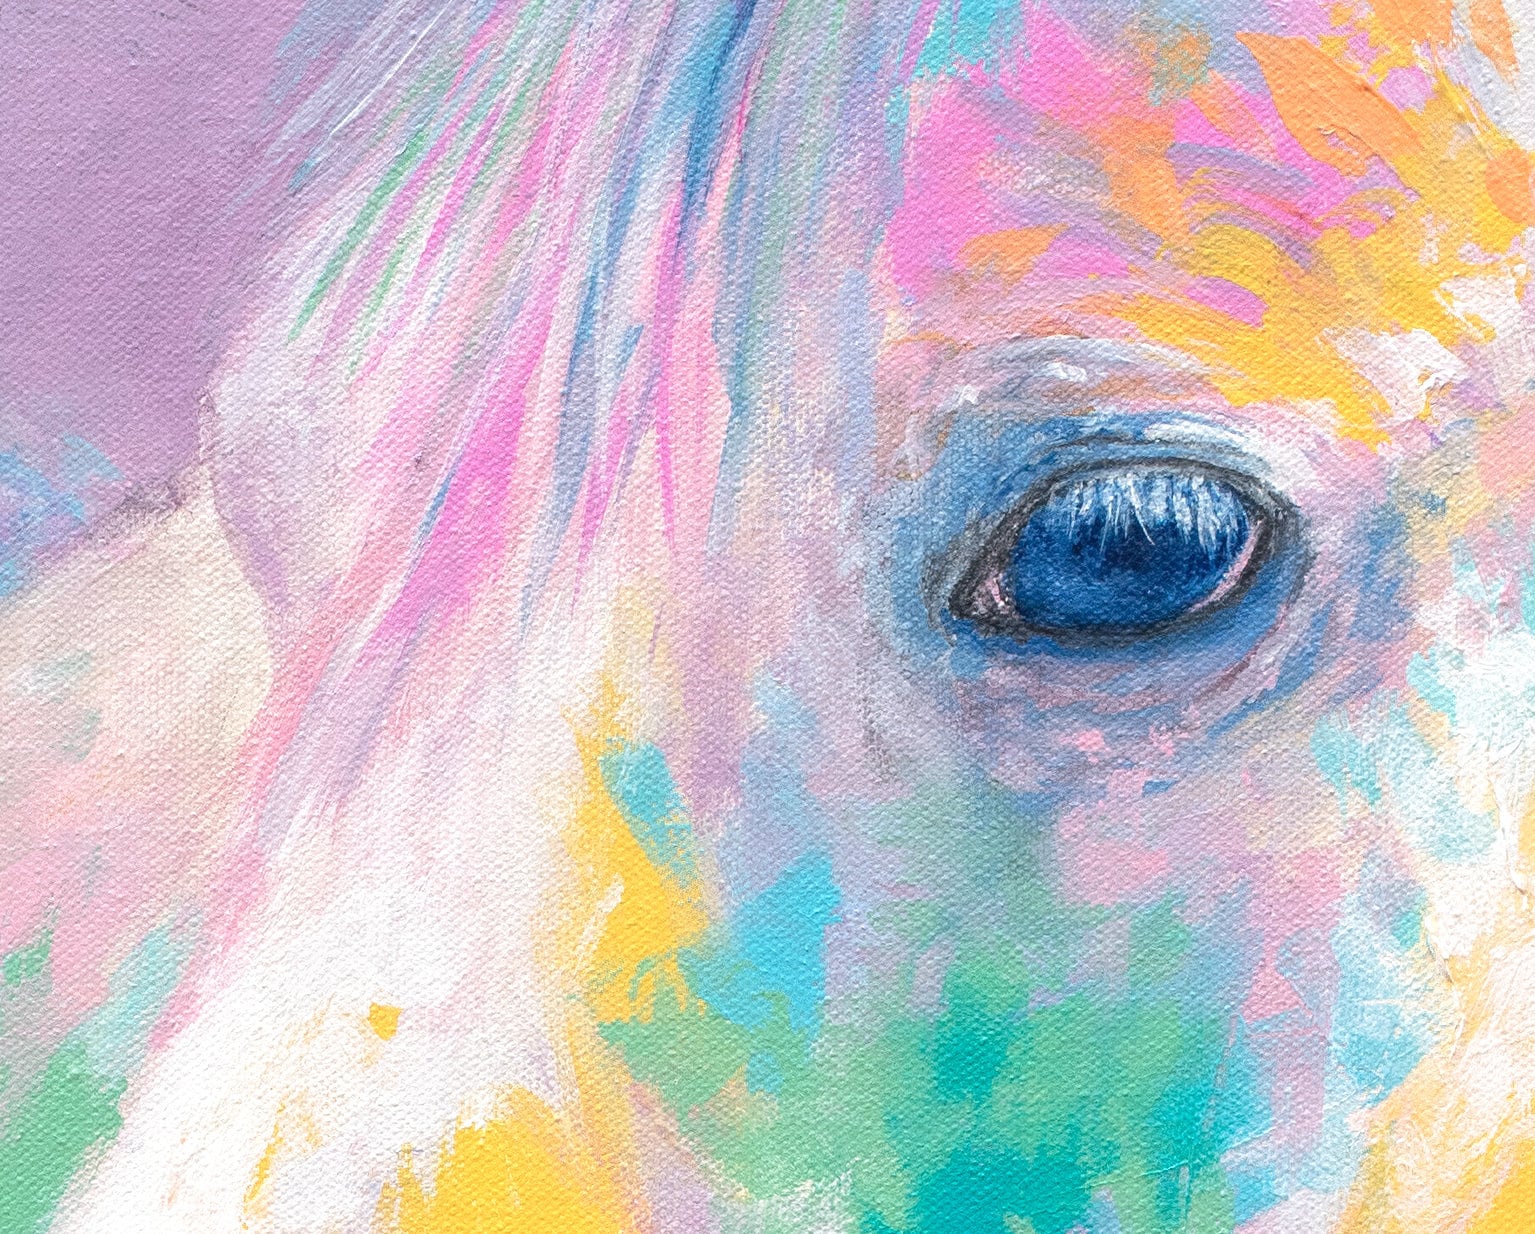 Colorful Horse Painting - 22x28"